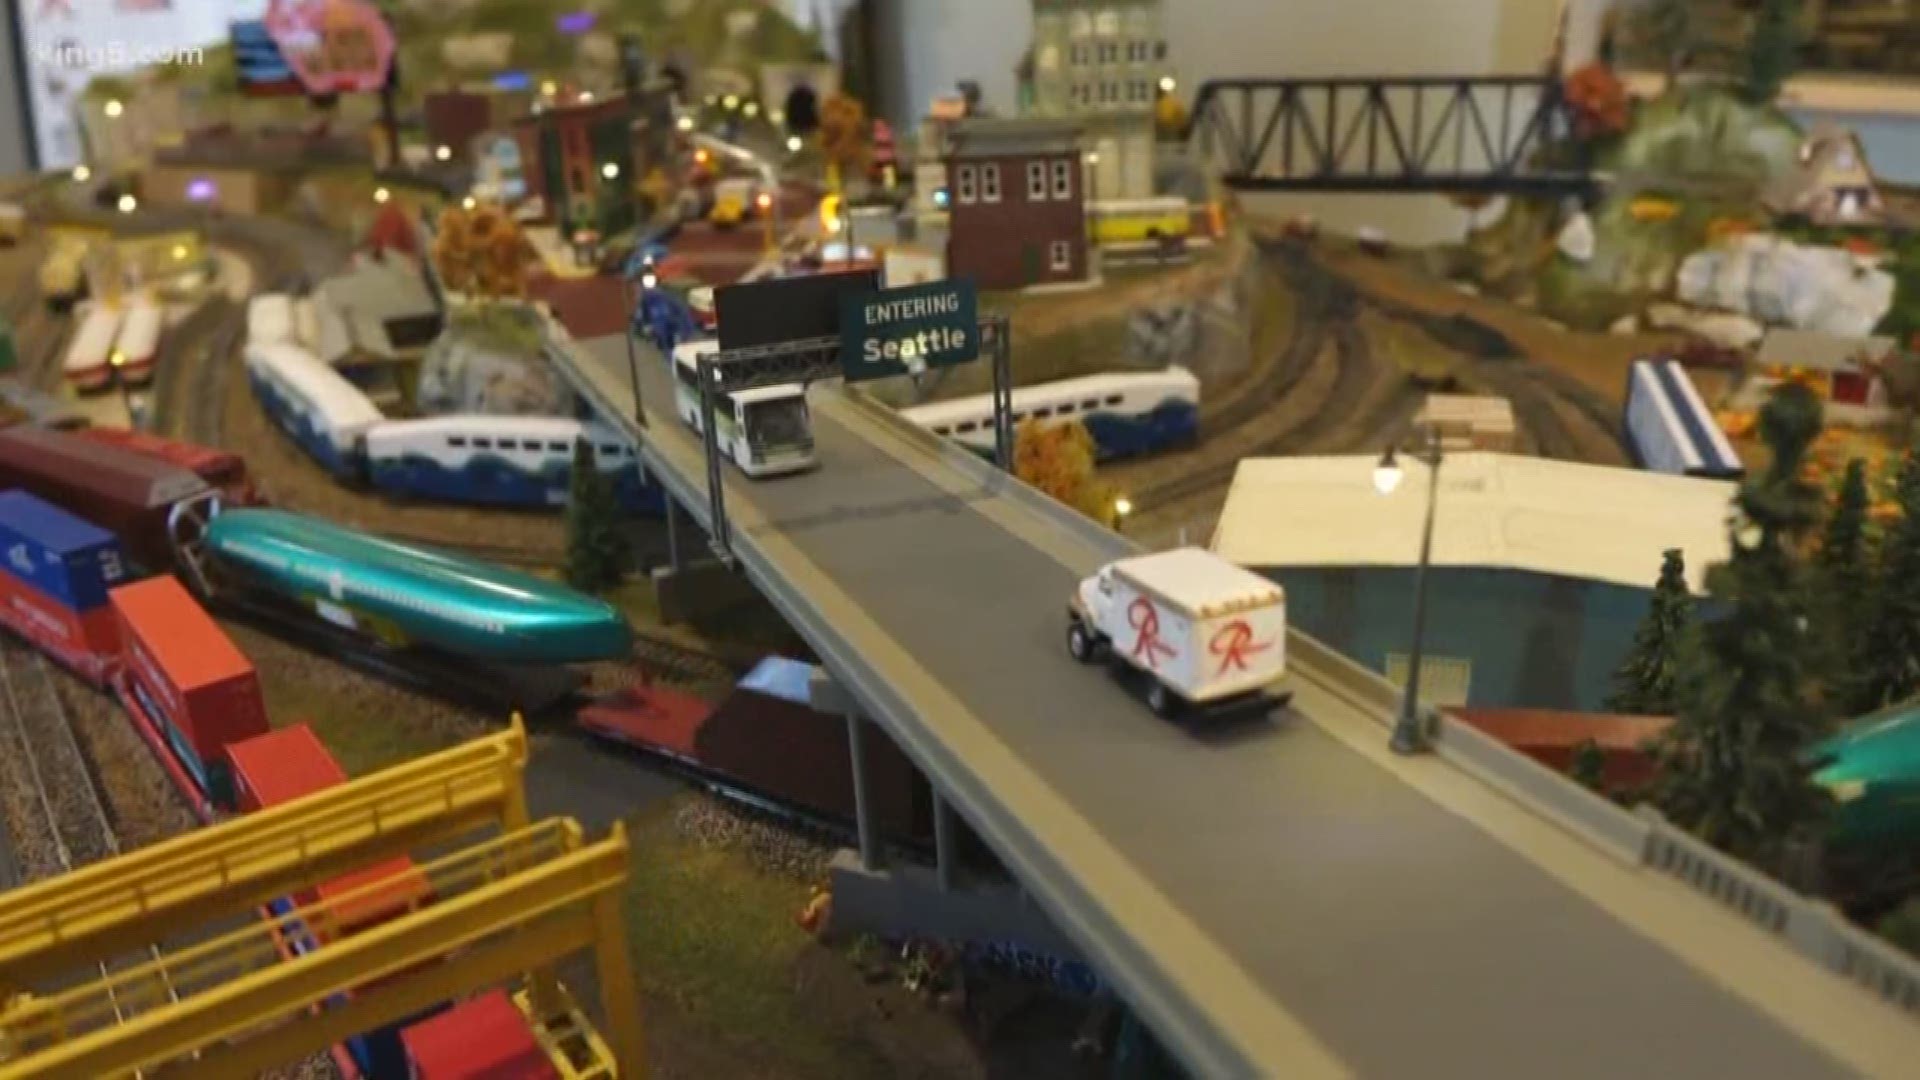 A new member of the Take 5 - 5 Hive posted pictures of his hobby and we just had to go check it out. KING 5's Chris Cashman gives us a closer look at a tiny version of Seattle.